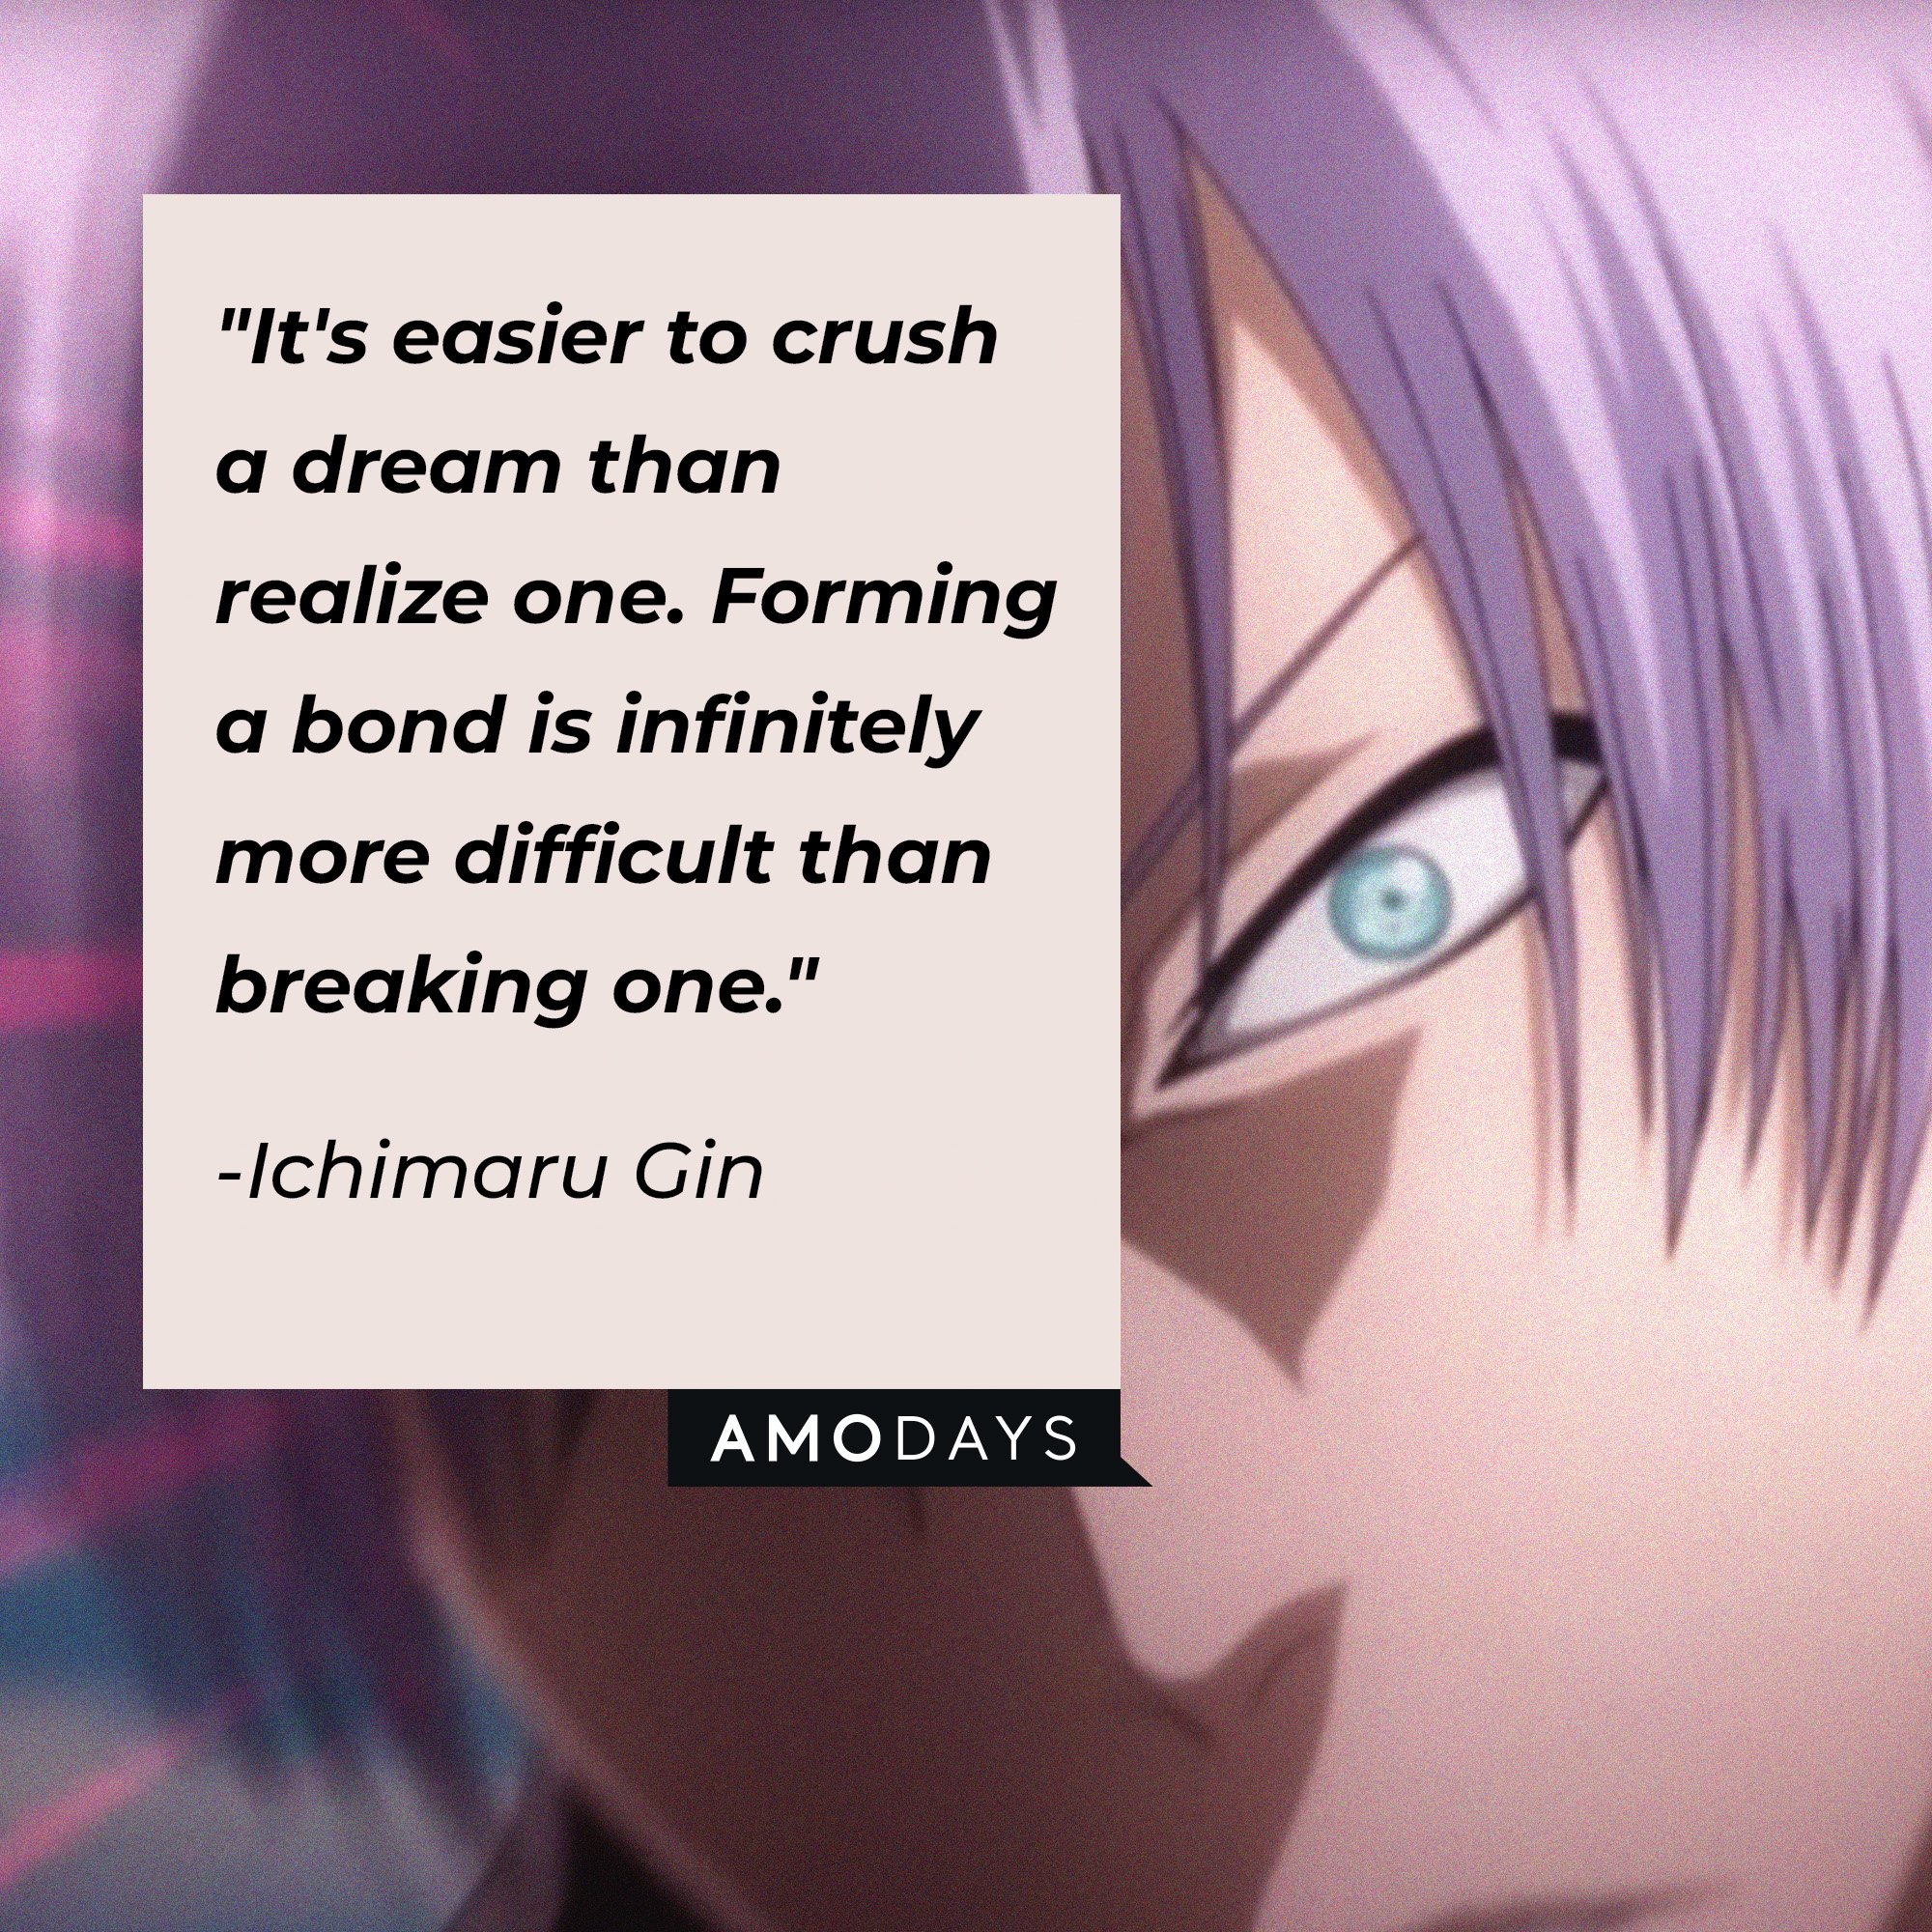  Ichimaru Gin’s quote: "It's easier to crush a dream than realize one. Forming a bond is infinitely more difficult than breaking one." | Image: AmoDays